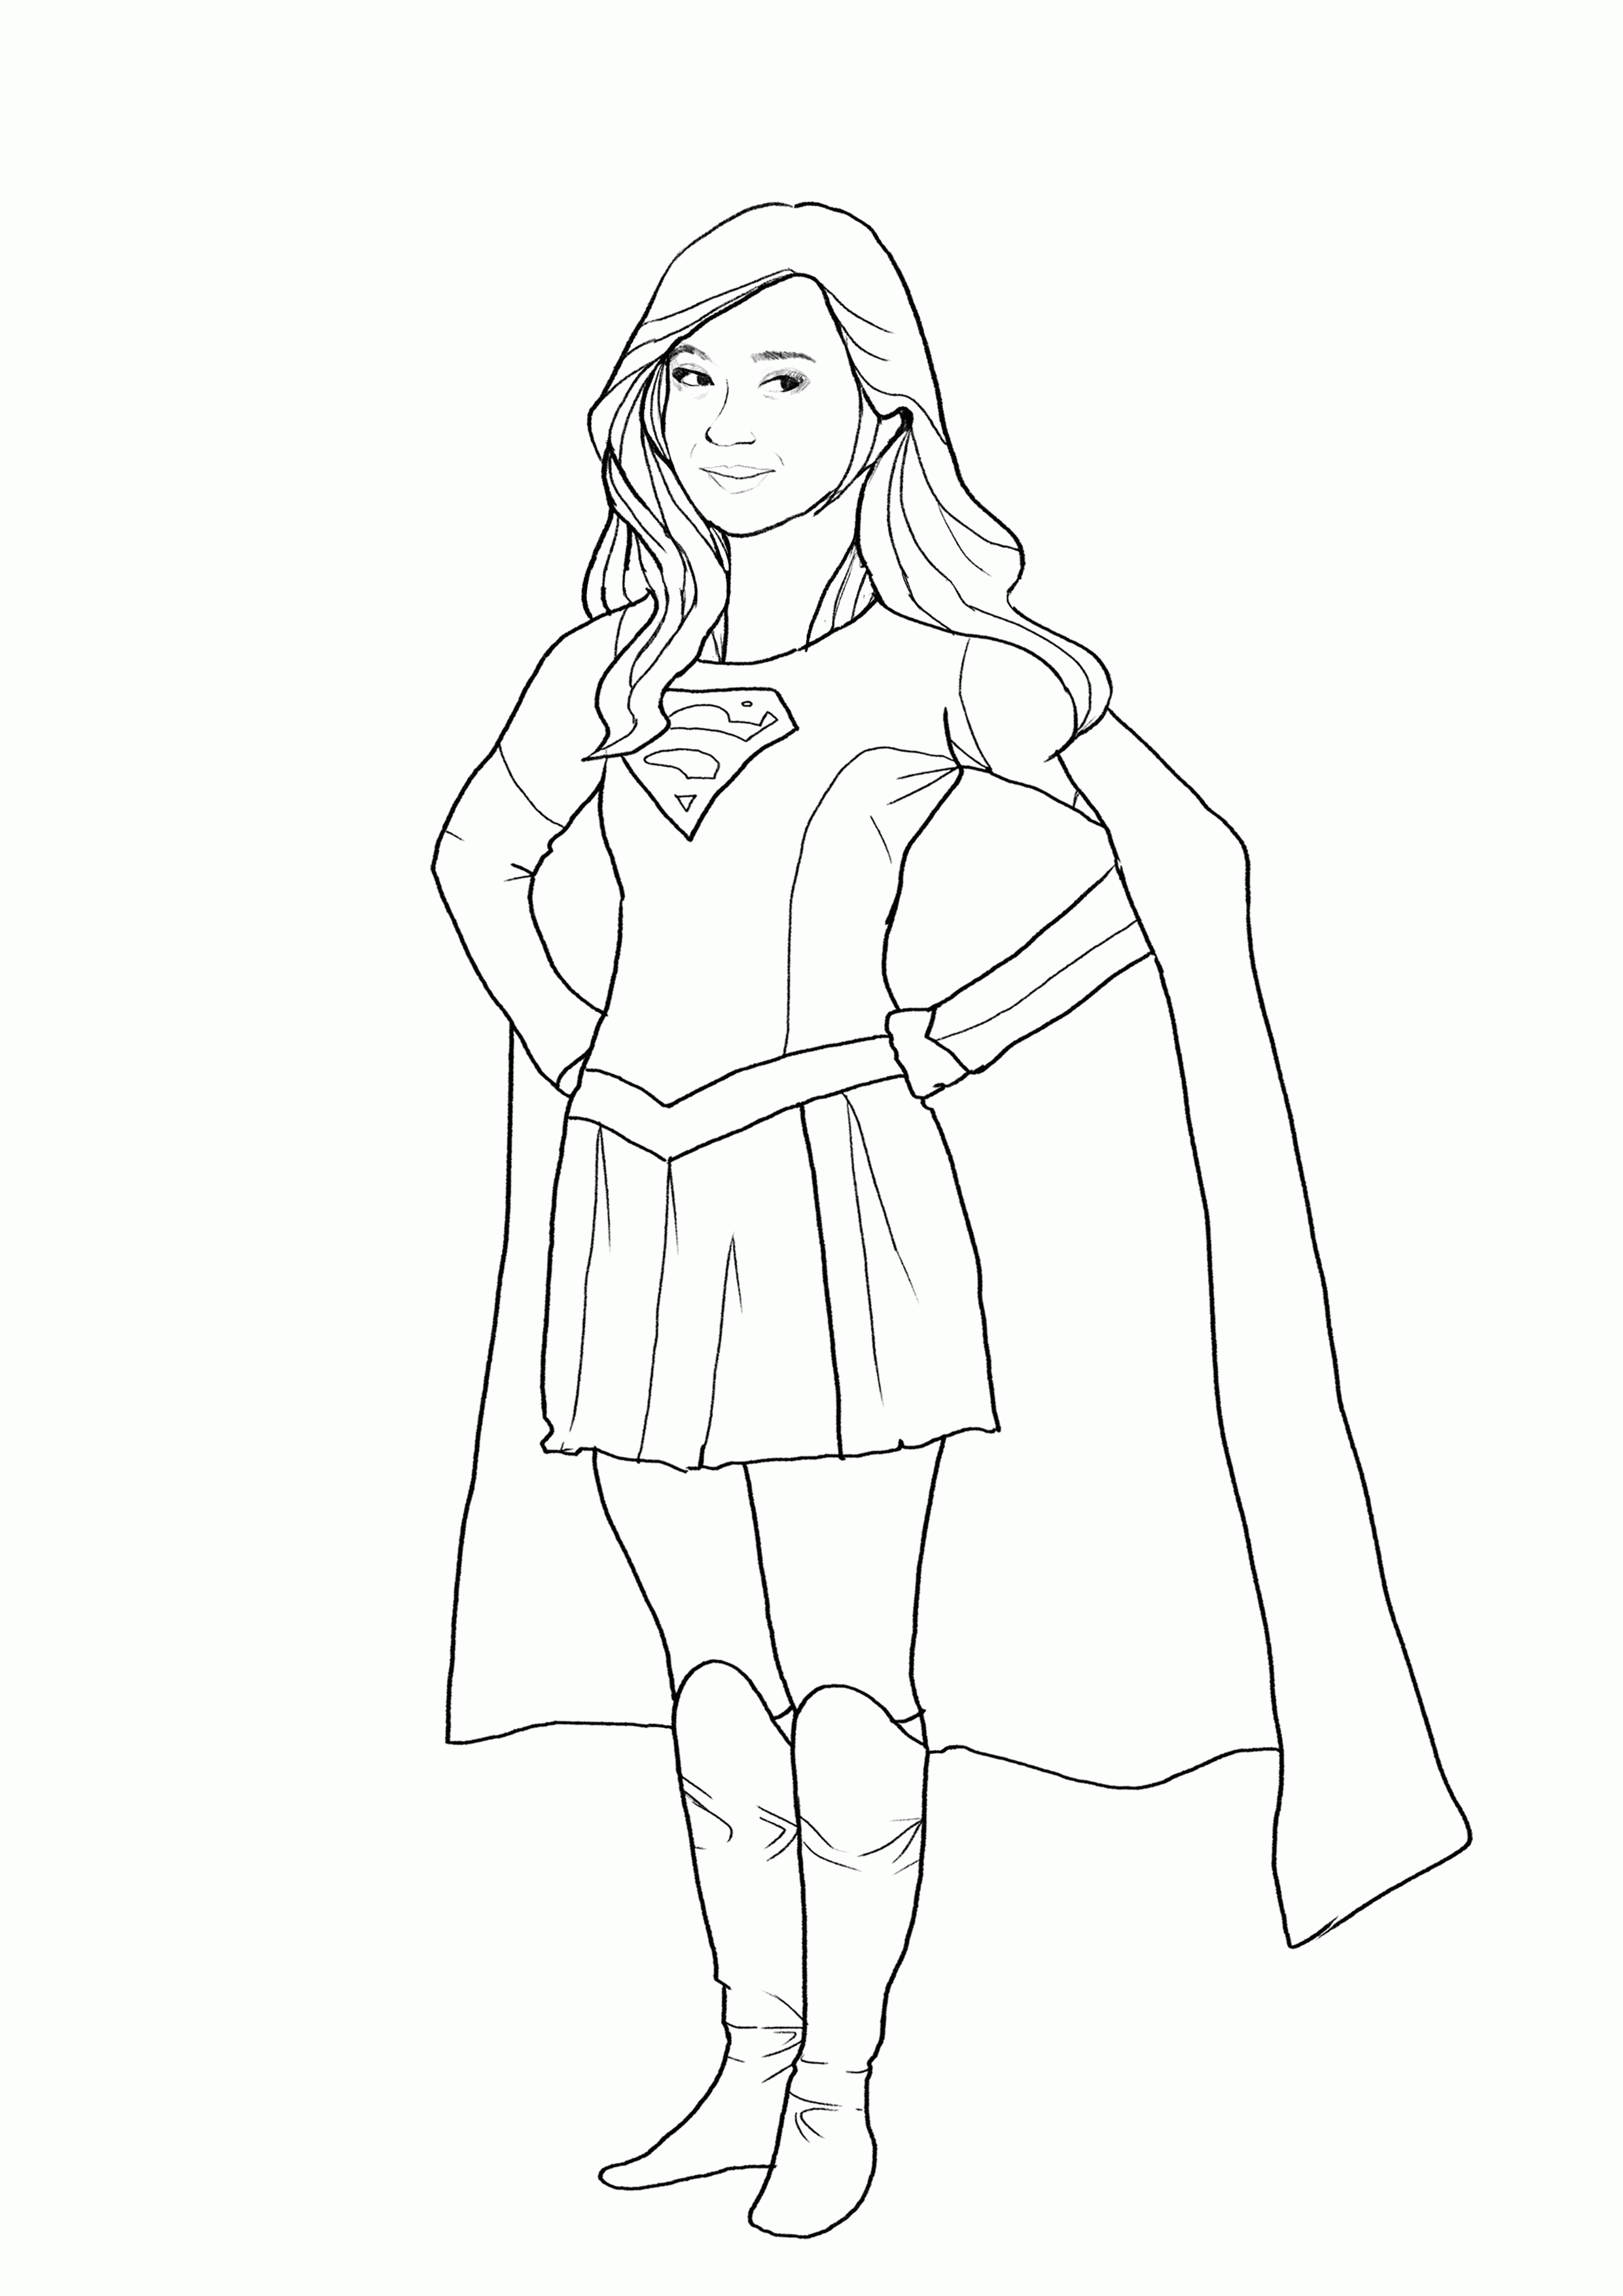 Download Supergirl Coloring Pages - Best Coloring Pages For Kids